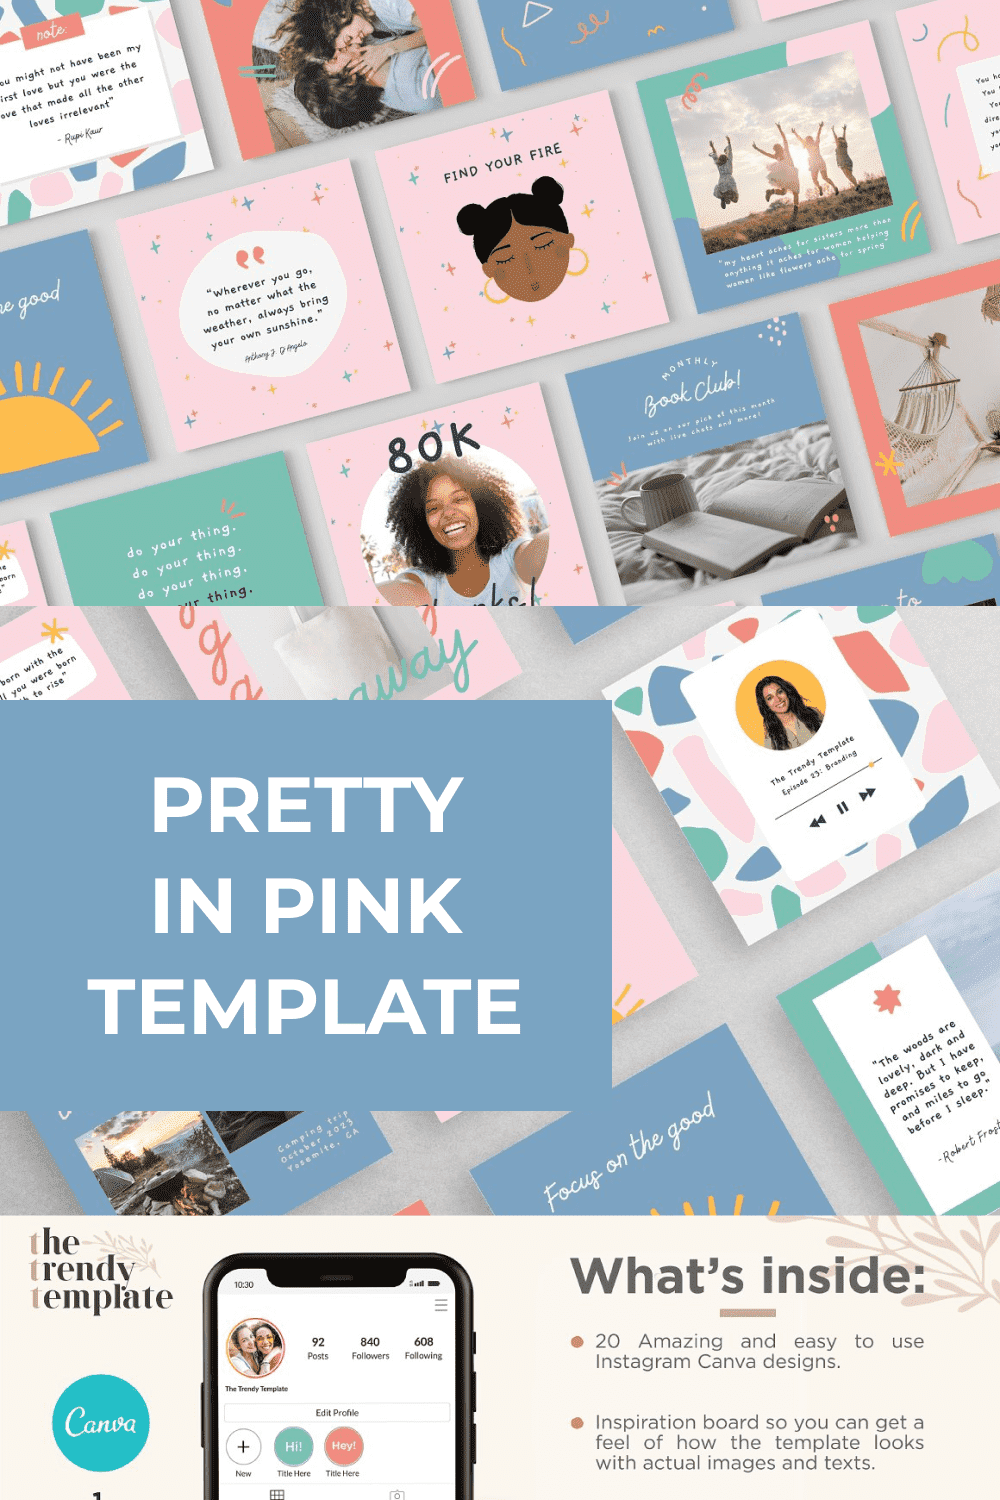 Pretty In Pink Template Preview - "What's Inside?"